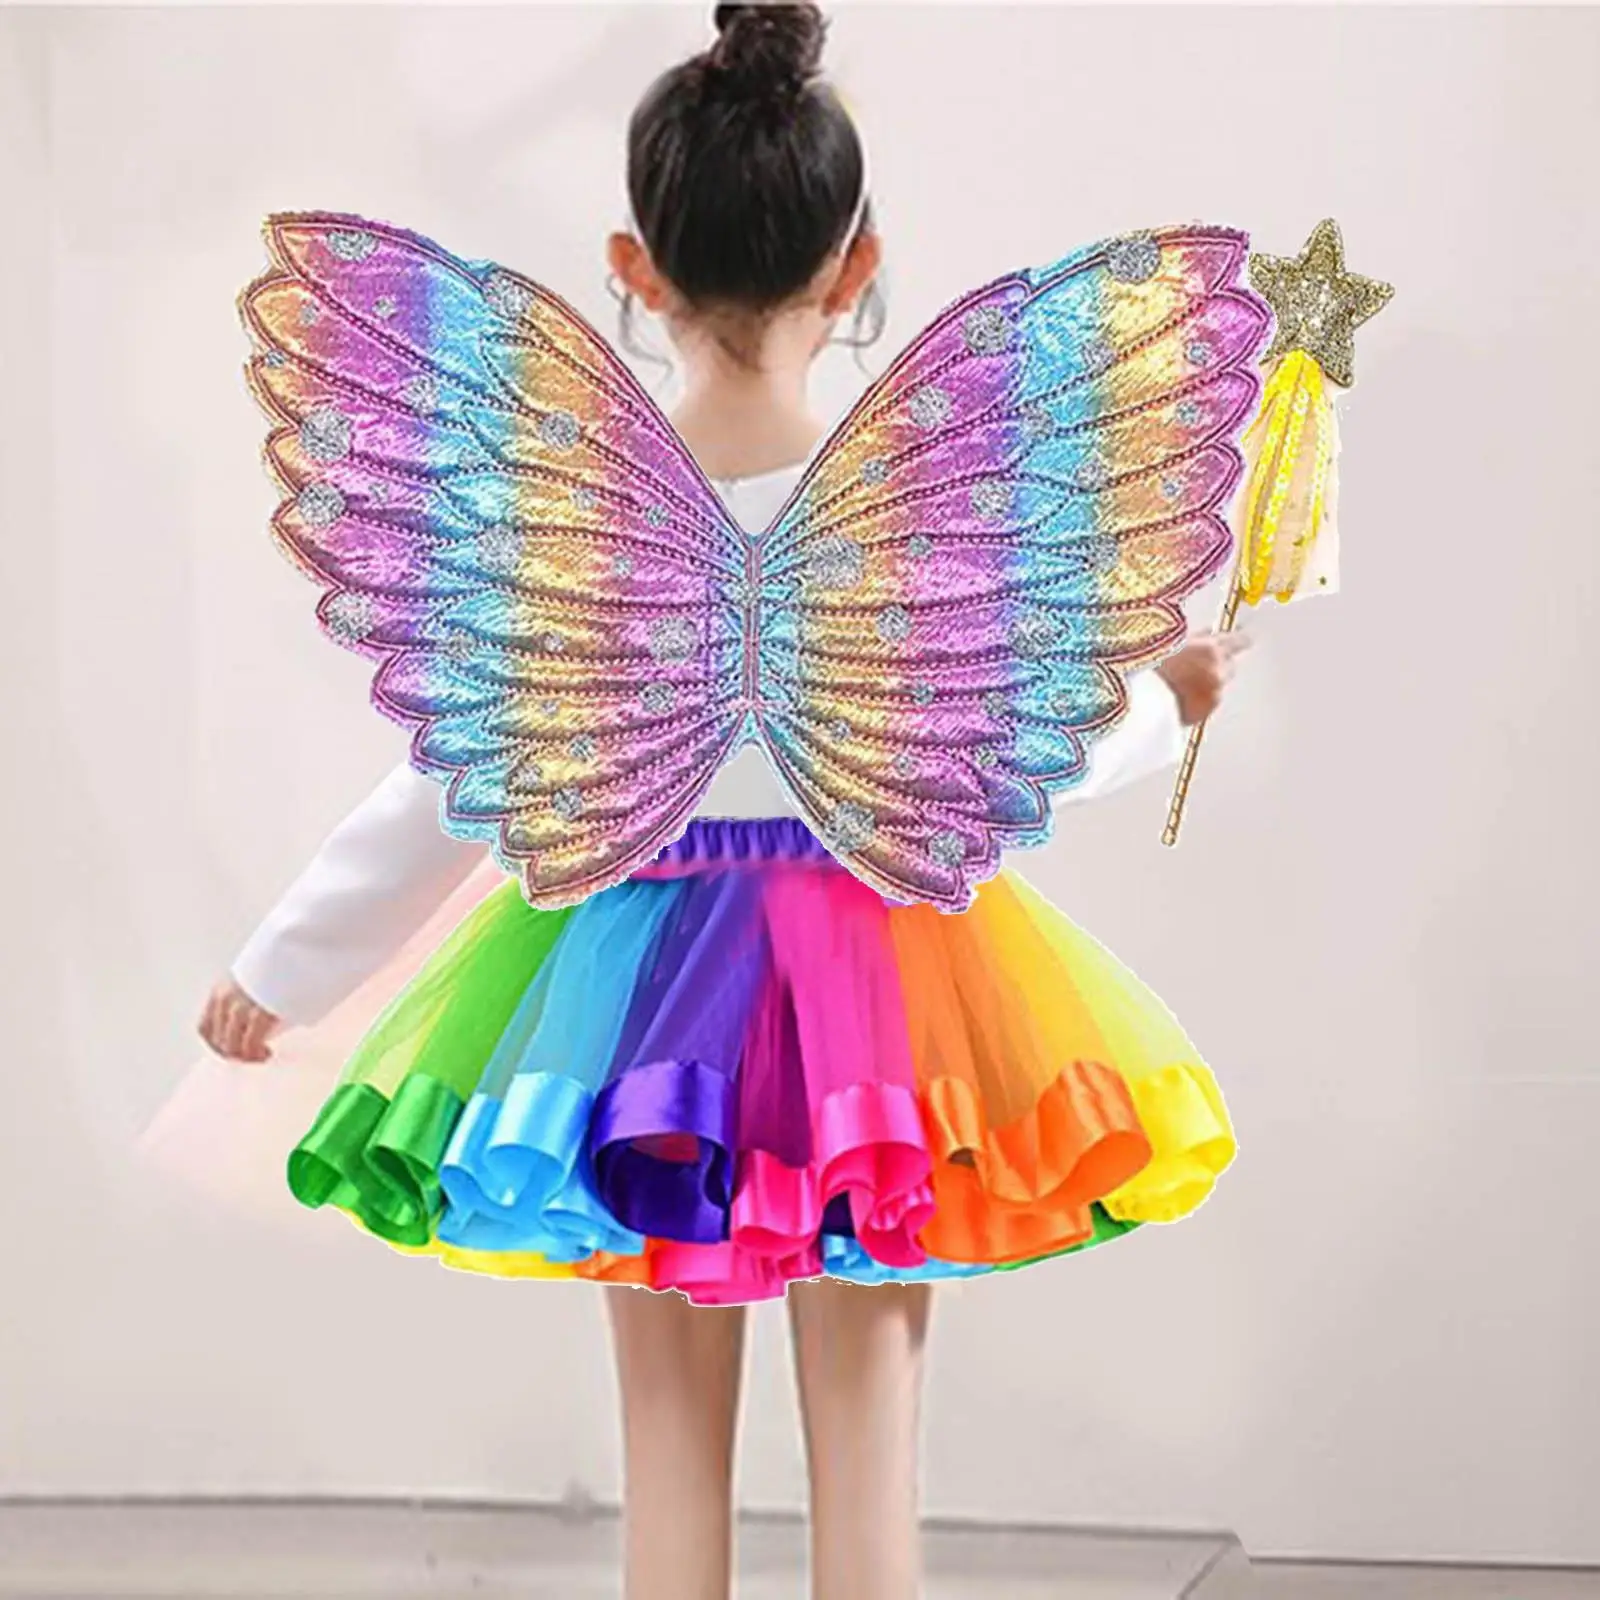 Girls Butterfly Wing Costume Fancy Dress up Fairy Children Wand Outfit for Photo Props Christmas Pretend Play Stage Performance